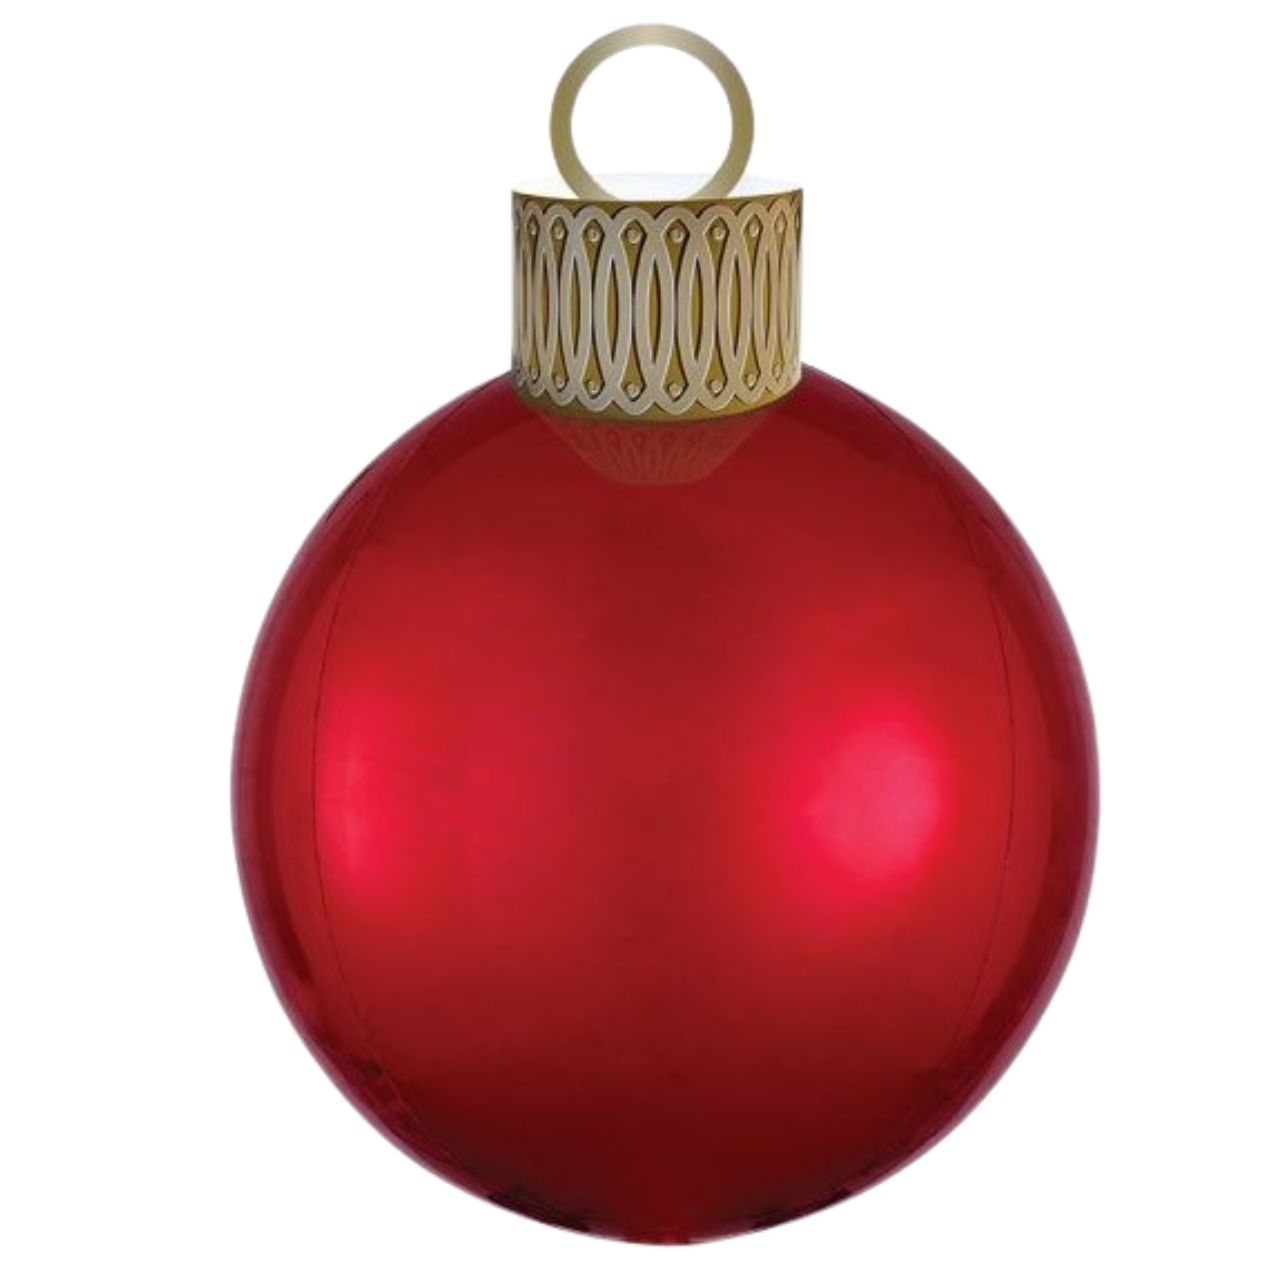 Red Christmas Ornament Foil Balloon